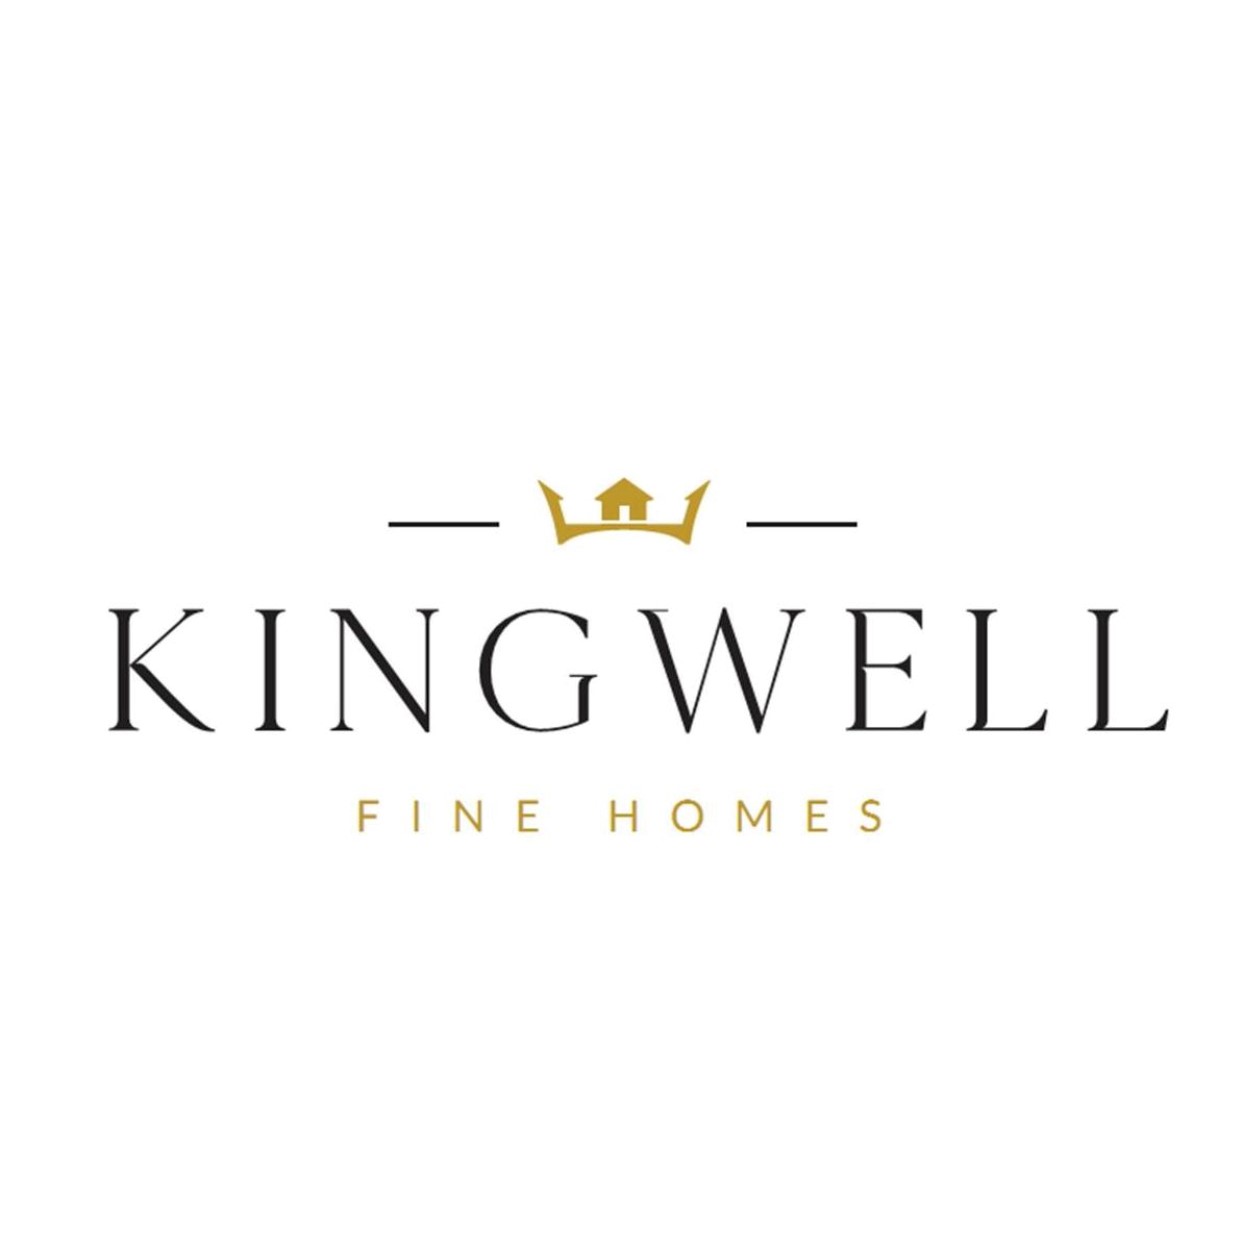 Kingwell Fine Homes - Guelph & District Home Builders Association